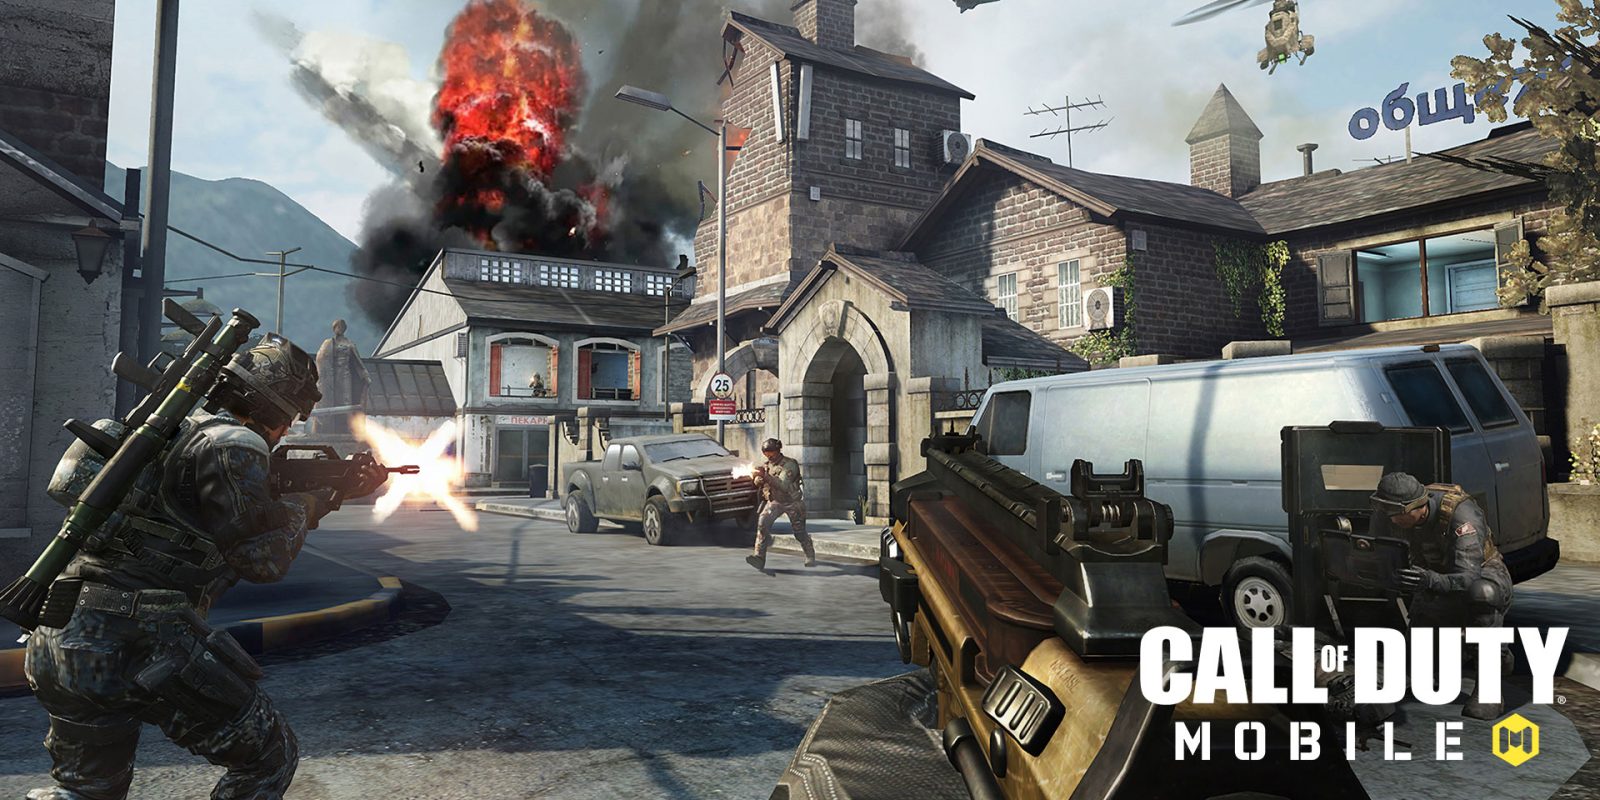 How To Fix Call Of Duty Mobile Failed To Create Match 3005 Error